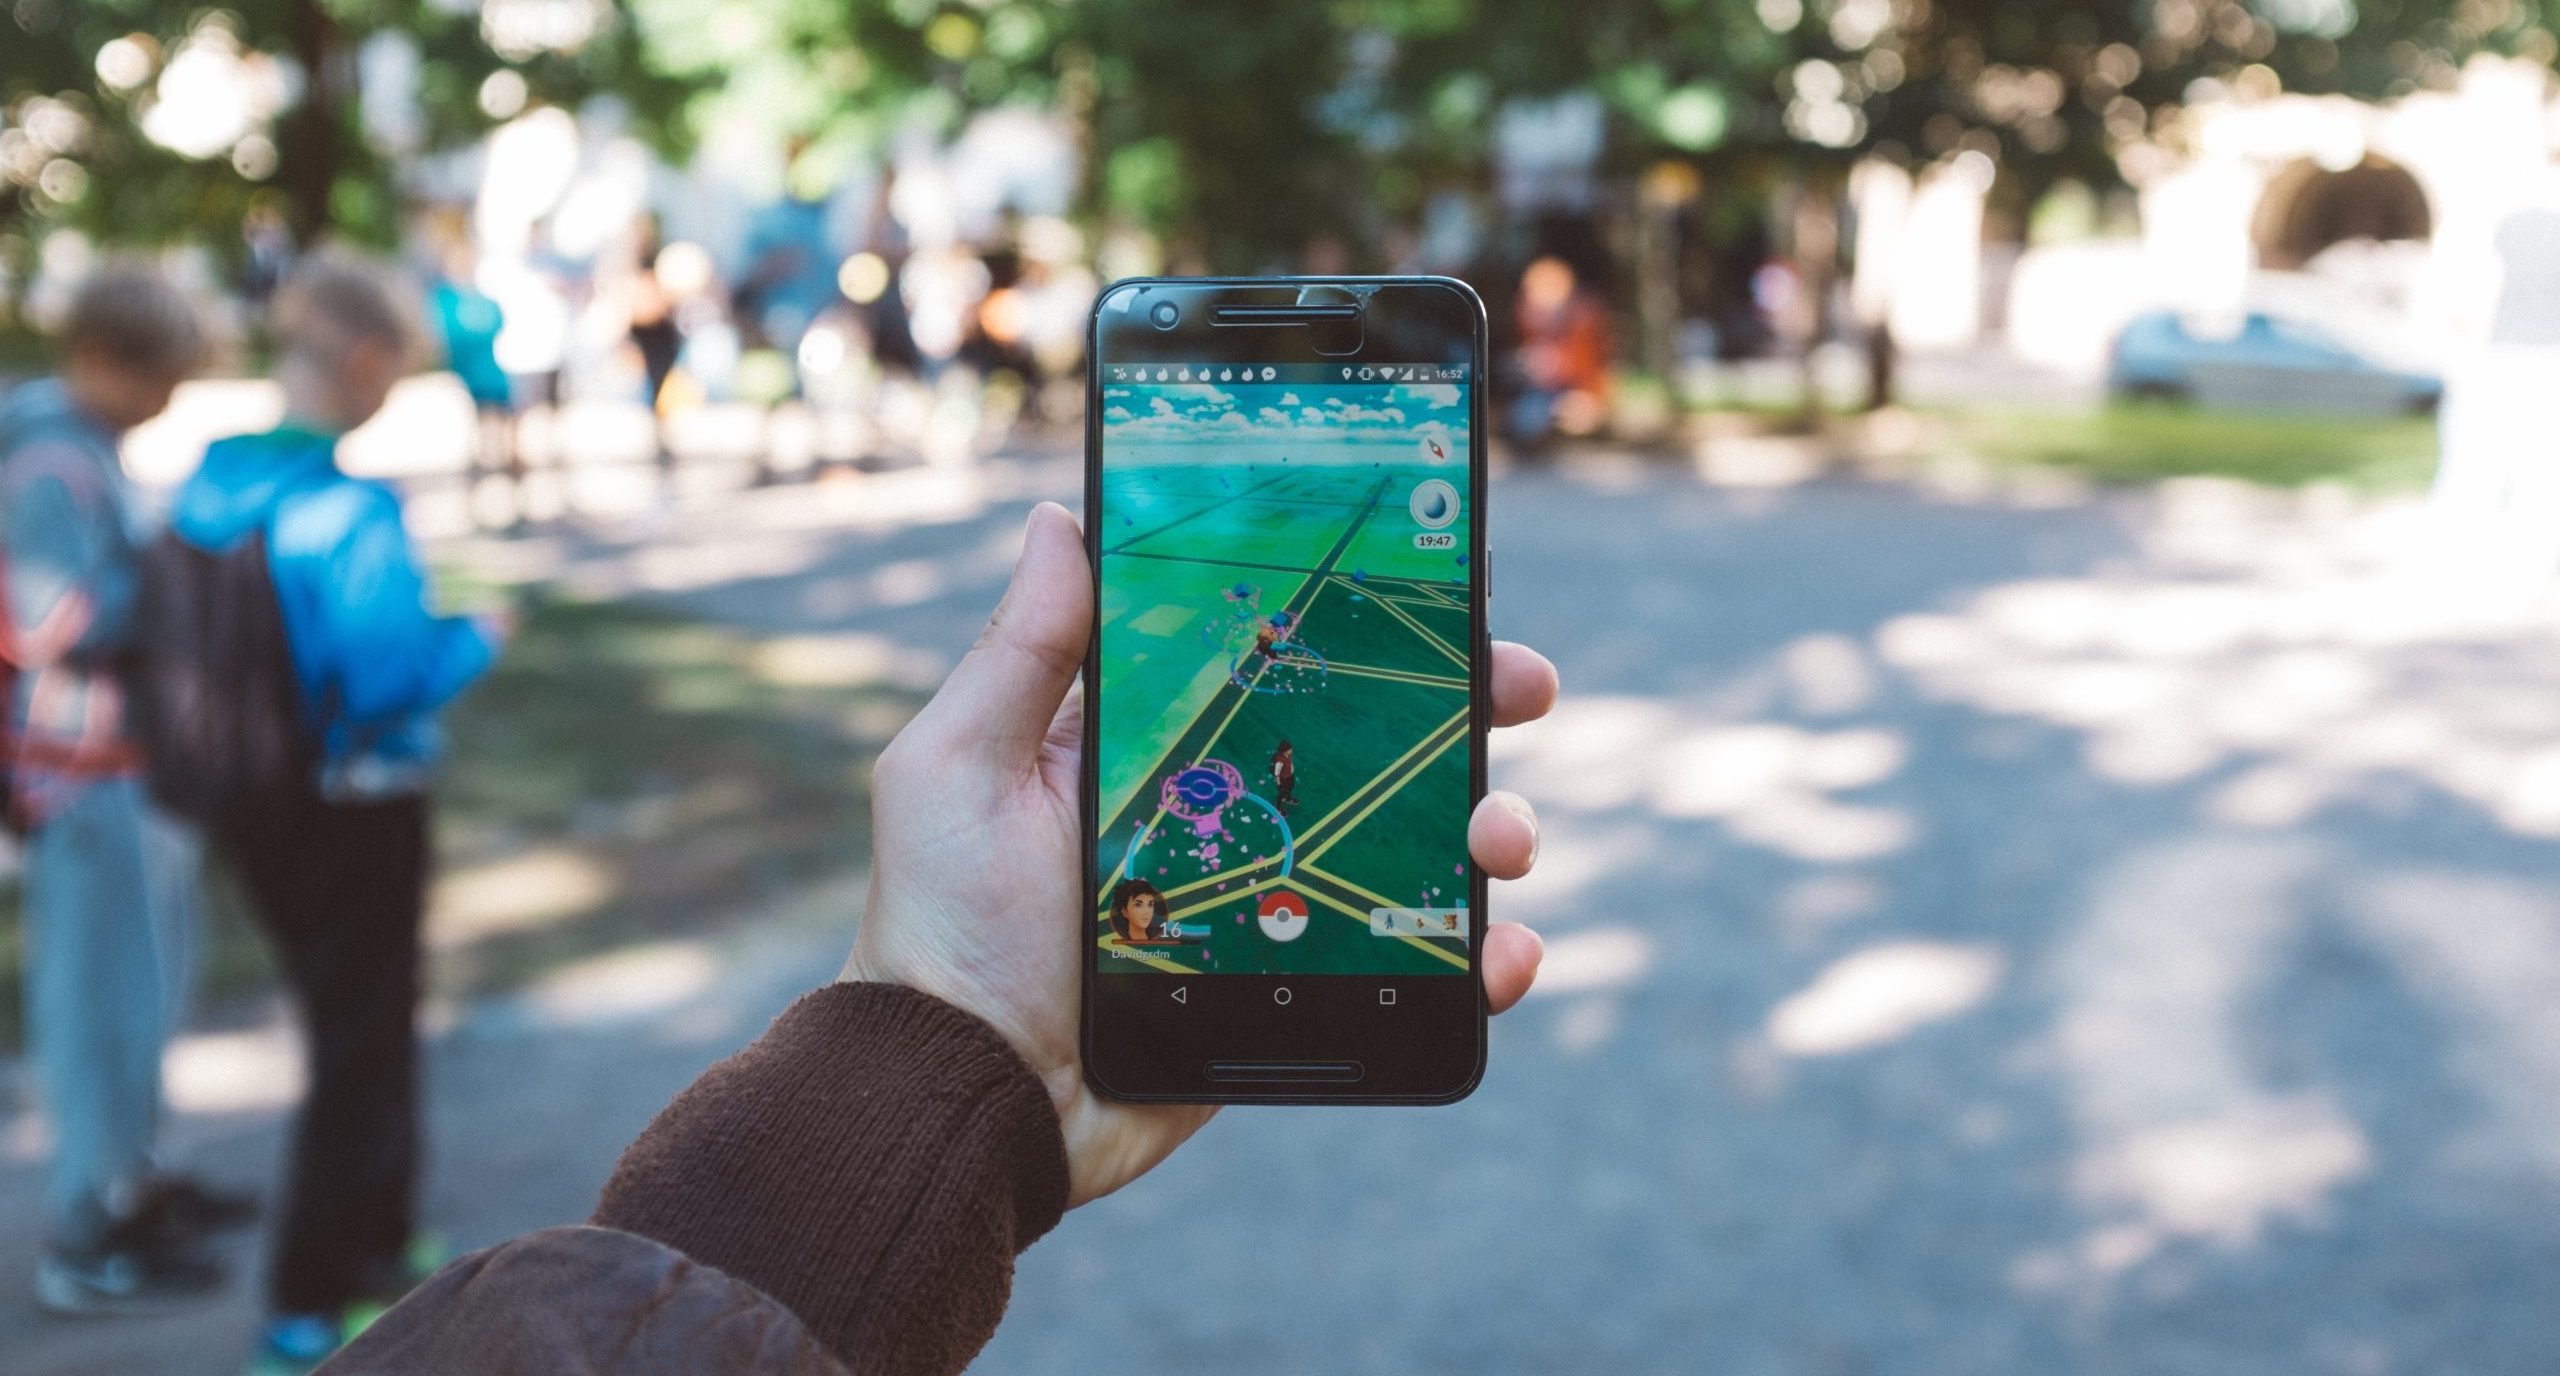 A hand holding a cell phone displaying the Pokemon GO app on map view. They are outside in a place with trees, cement and dappled sunlight.